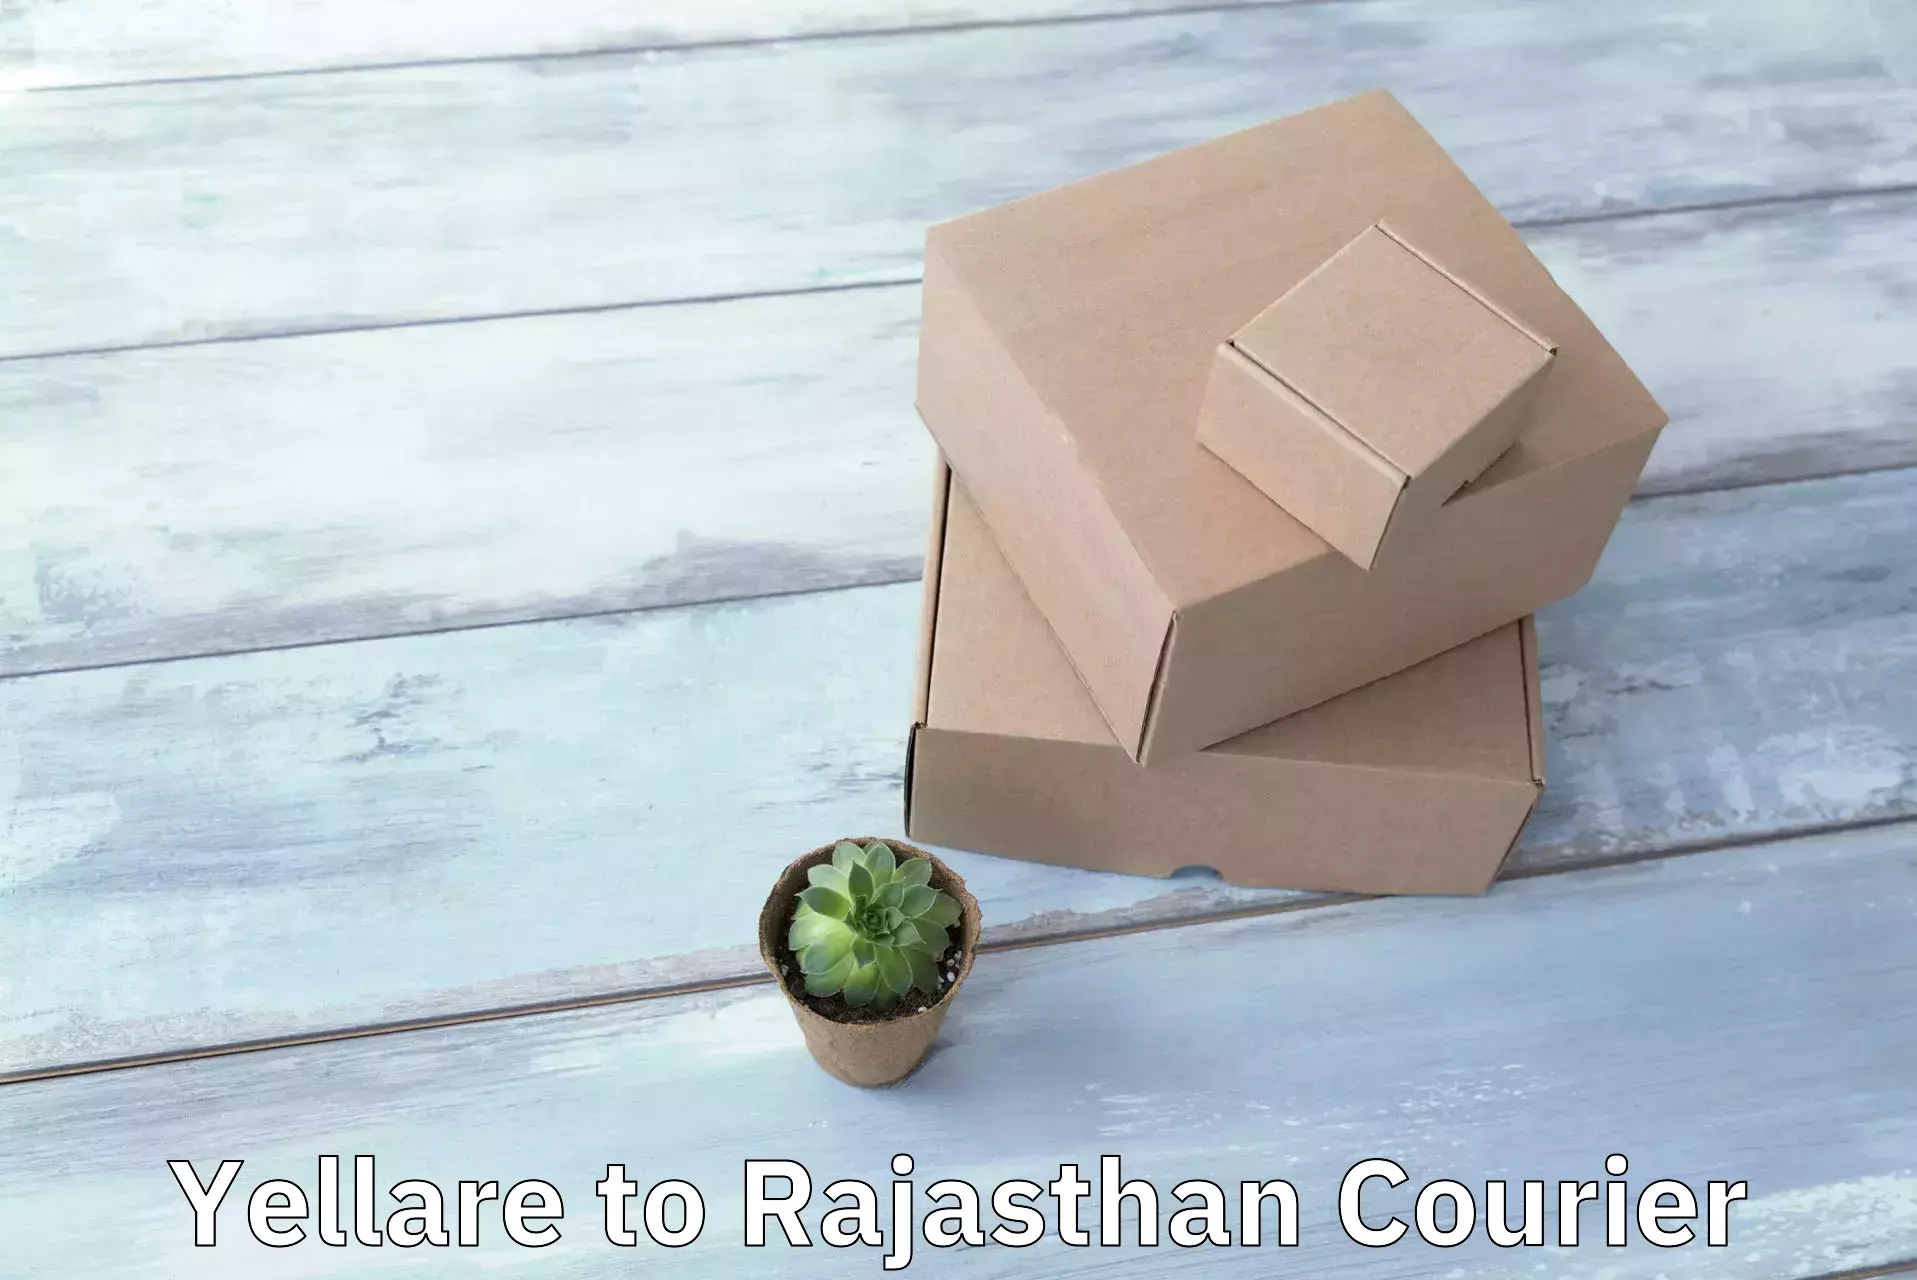 Customizable delivery plans Yellare to Chittorgarh